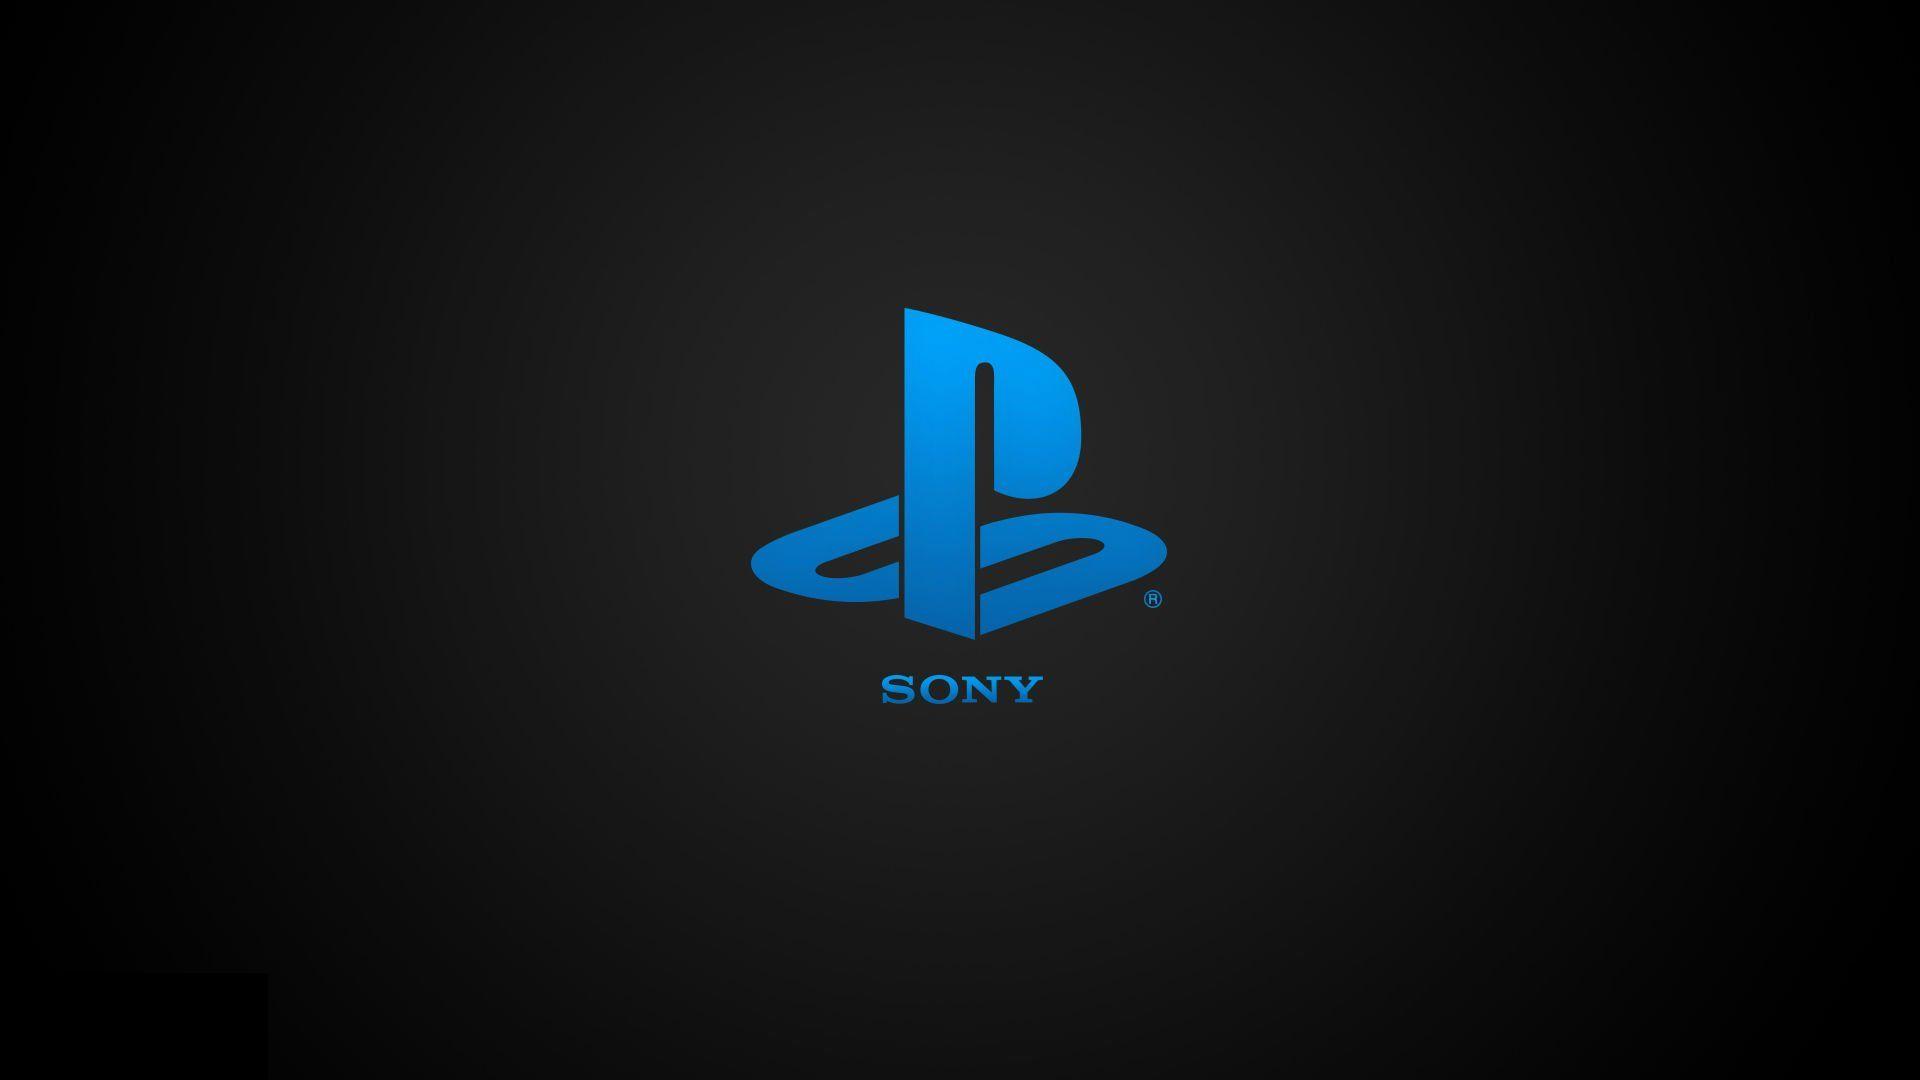 PS4 Wallpaper Free PS4 Background